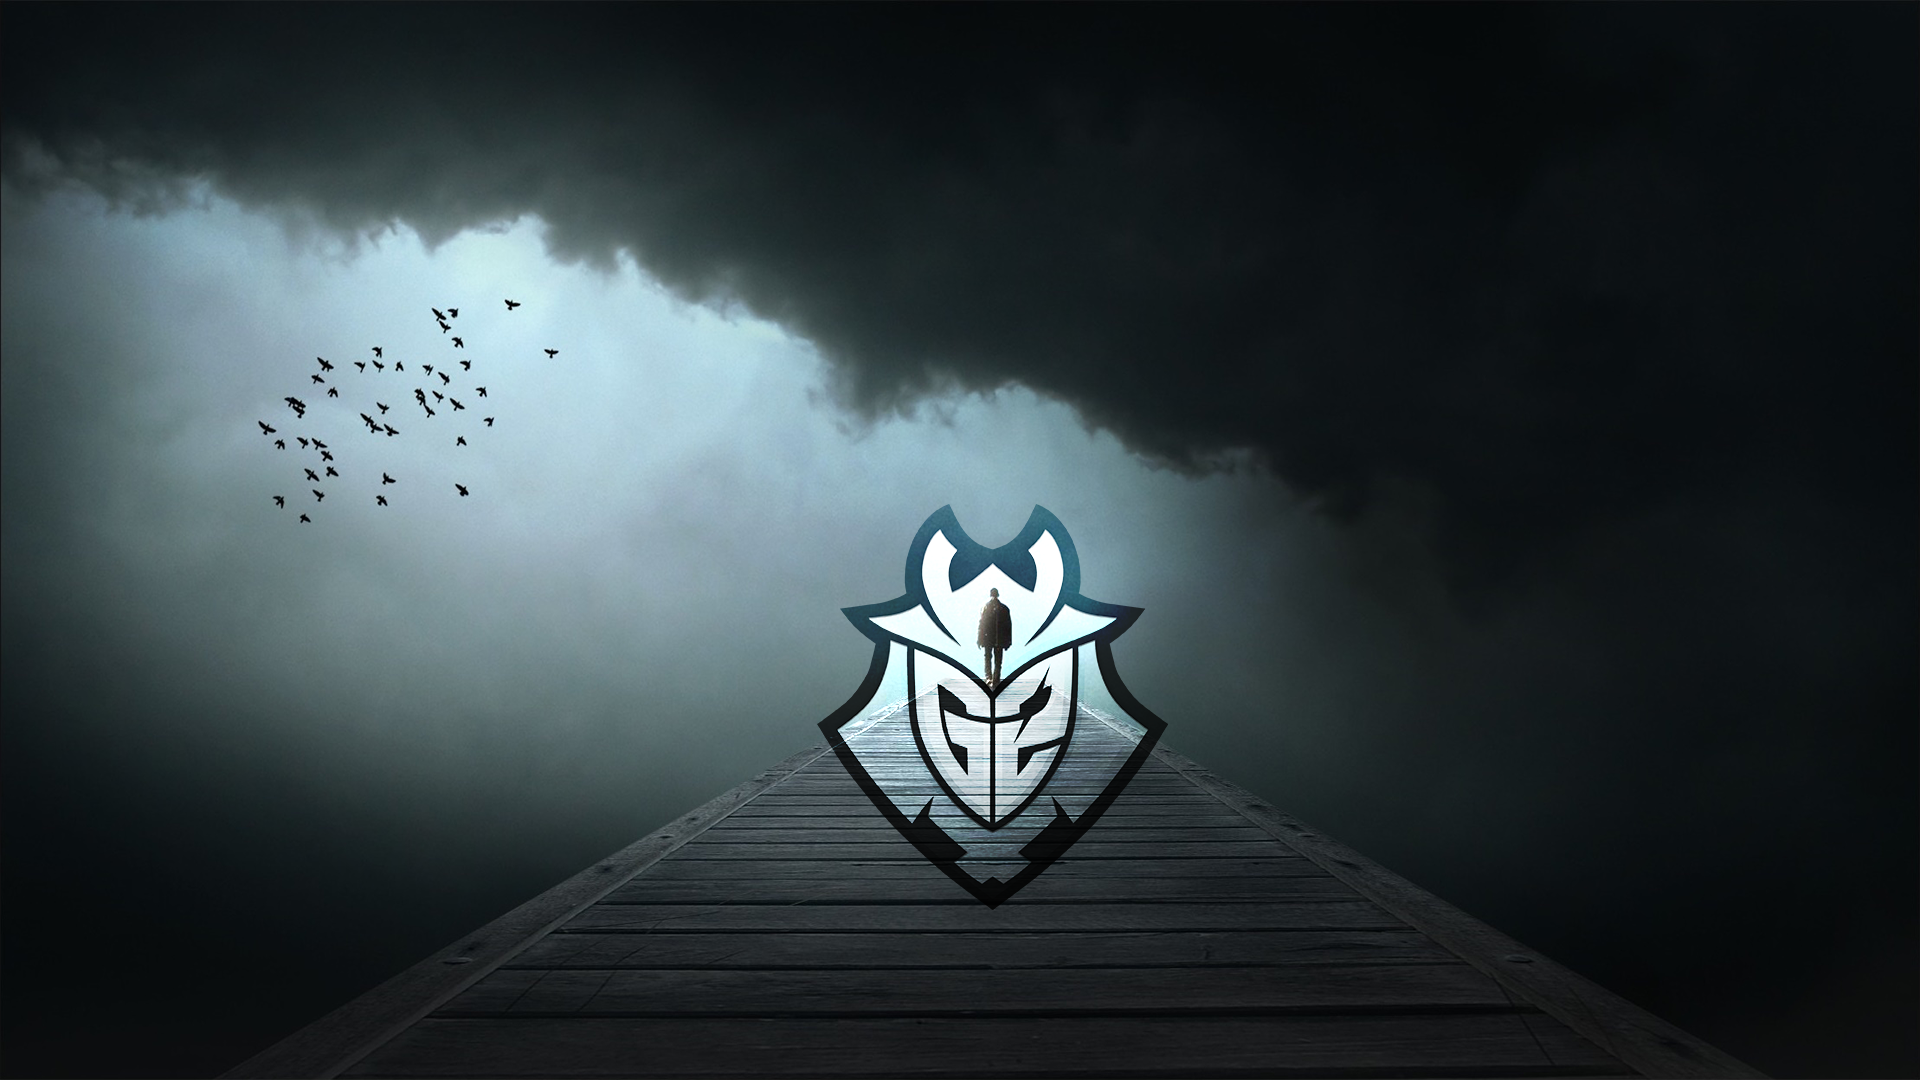 G2 Wallpapers